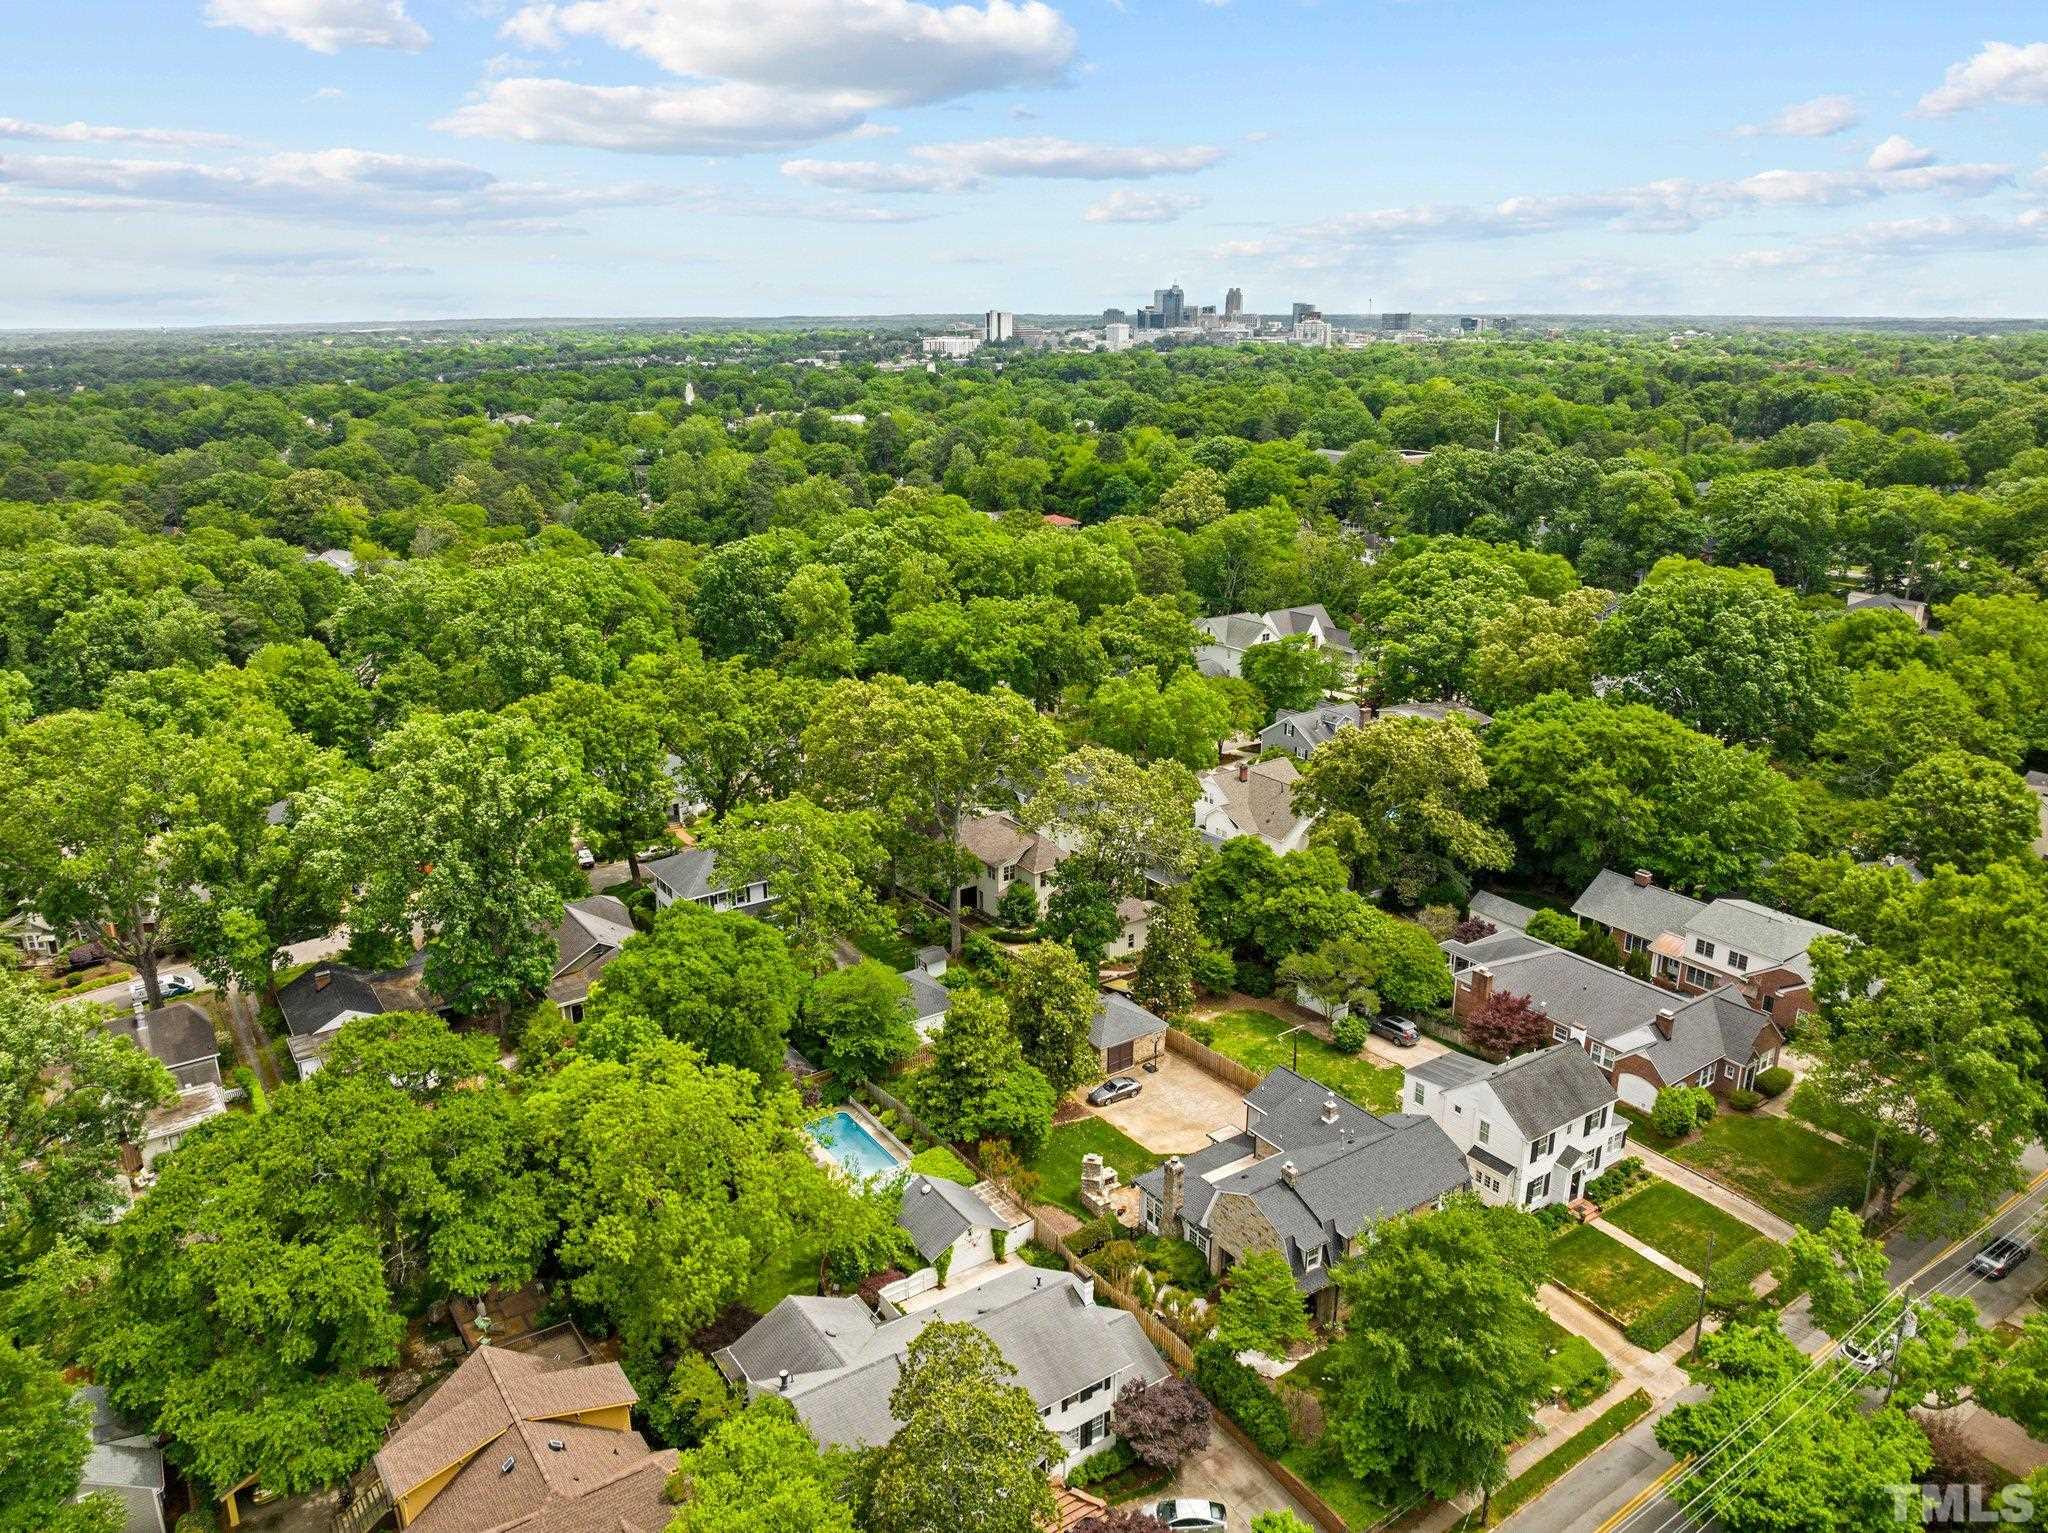 Drone is hovering directly above 2217 St. Mary's Street looking over the tree line at Downtown Raleigh. Close and convenient to so many things while maintaining a private oasis feel.